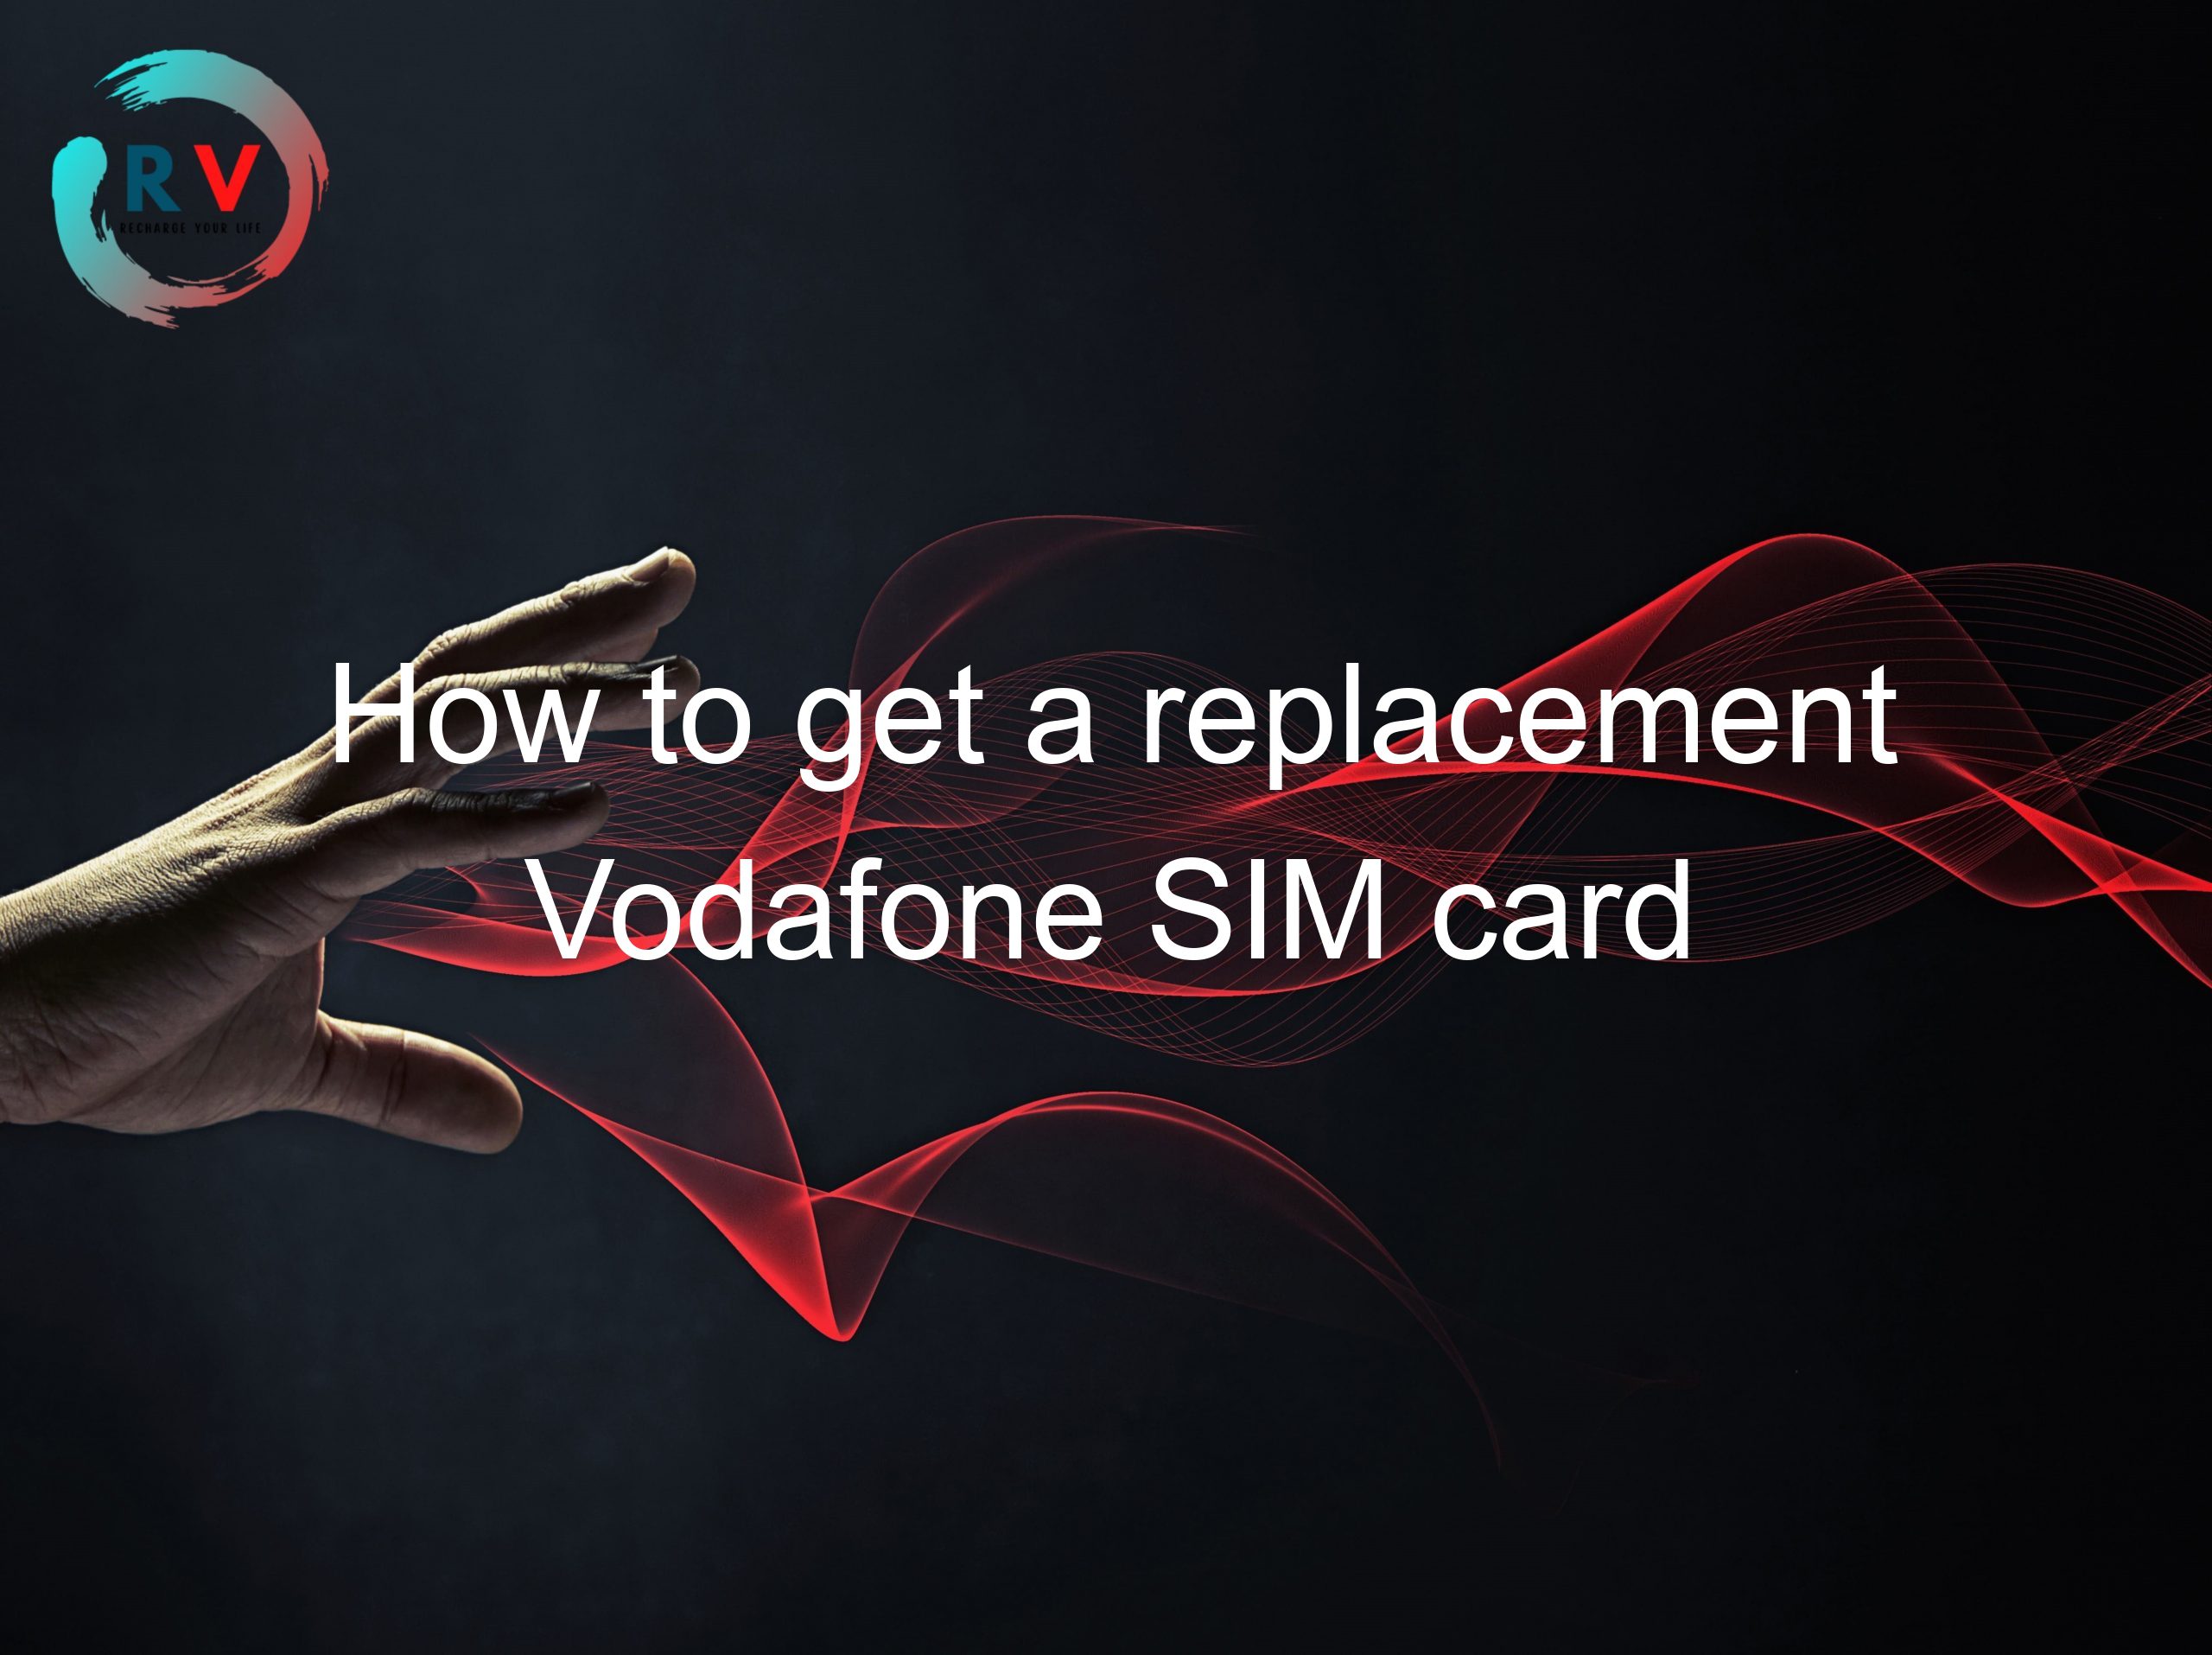 How to get a replacement Vodafone SIM card